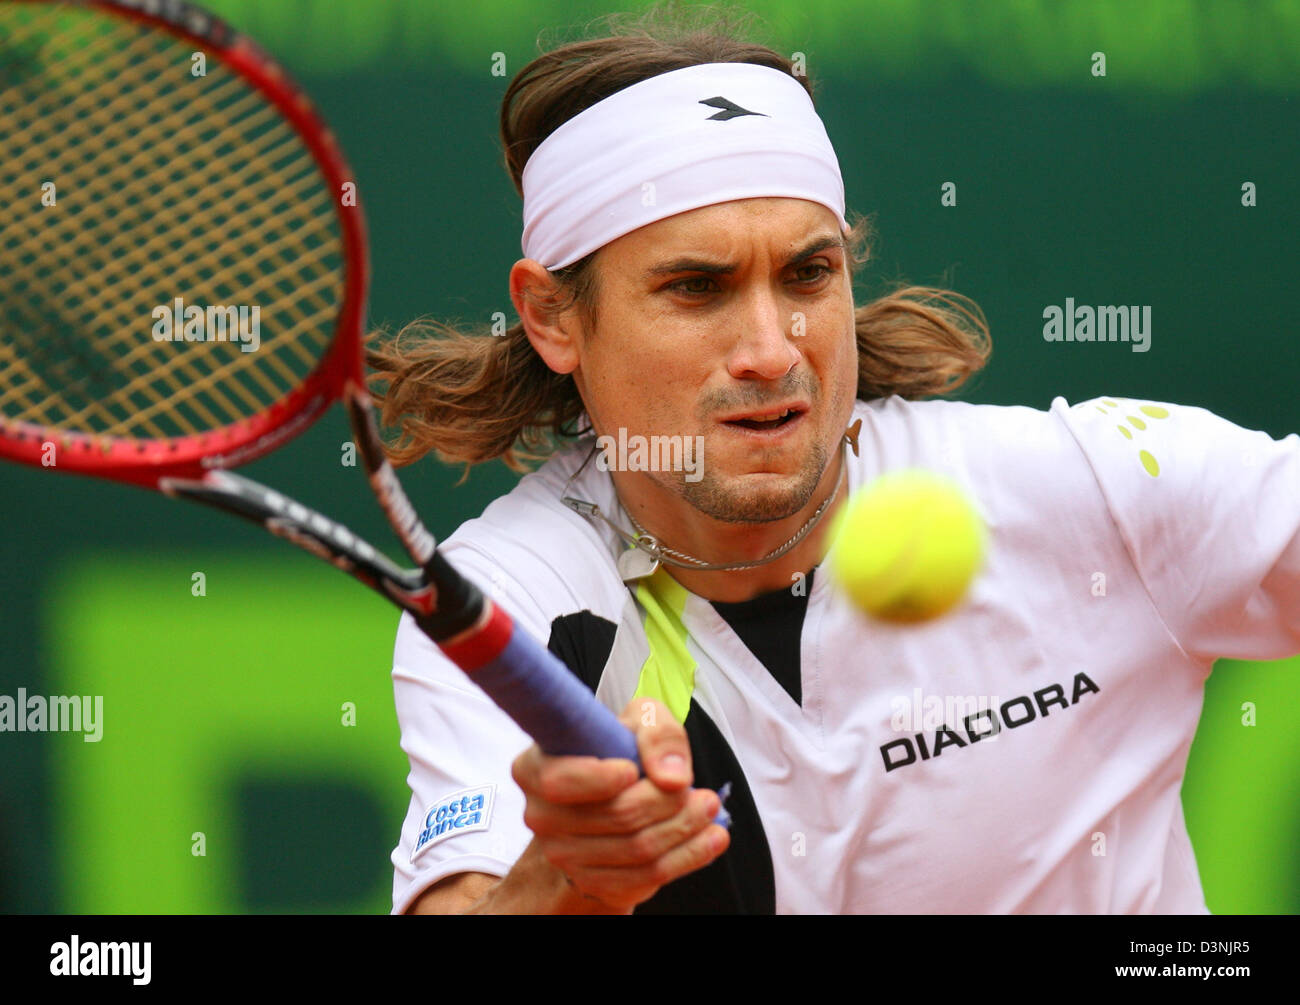 Spanish David Ferrer returns the ball during his match vs. Croat Ljubicic at the Tennis World Team Cup match in Duesseldorf, Germany, Wednesday 24 May 2006. Ferrer won with 6-2 and 6-2 and gained the lead with his team in the blue group with 1-0. Photo: Felix Heyder Stock Photo